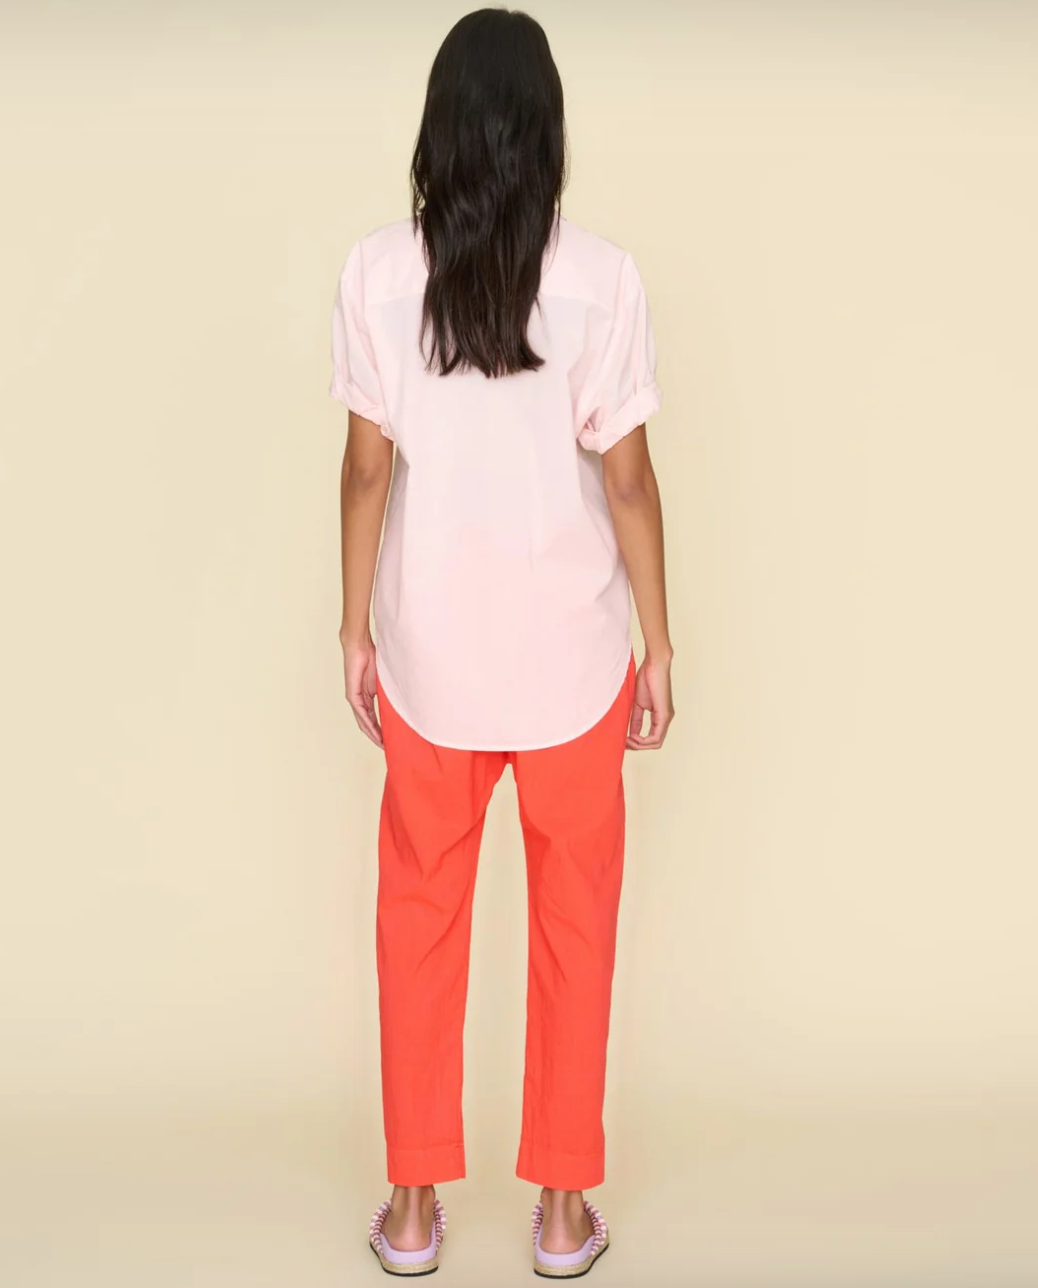 A person with long dark hair is standing with their back to the camera, set against a plain beige background. They are wearing a light pink short-sleeve shirt, bright orange Xirena Punch Draper Pant, and pink striped sandals. This could be a relaxed scene from a cozy bungalow in Scottsdale, Arizona.